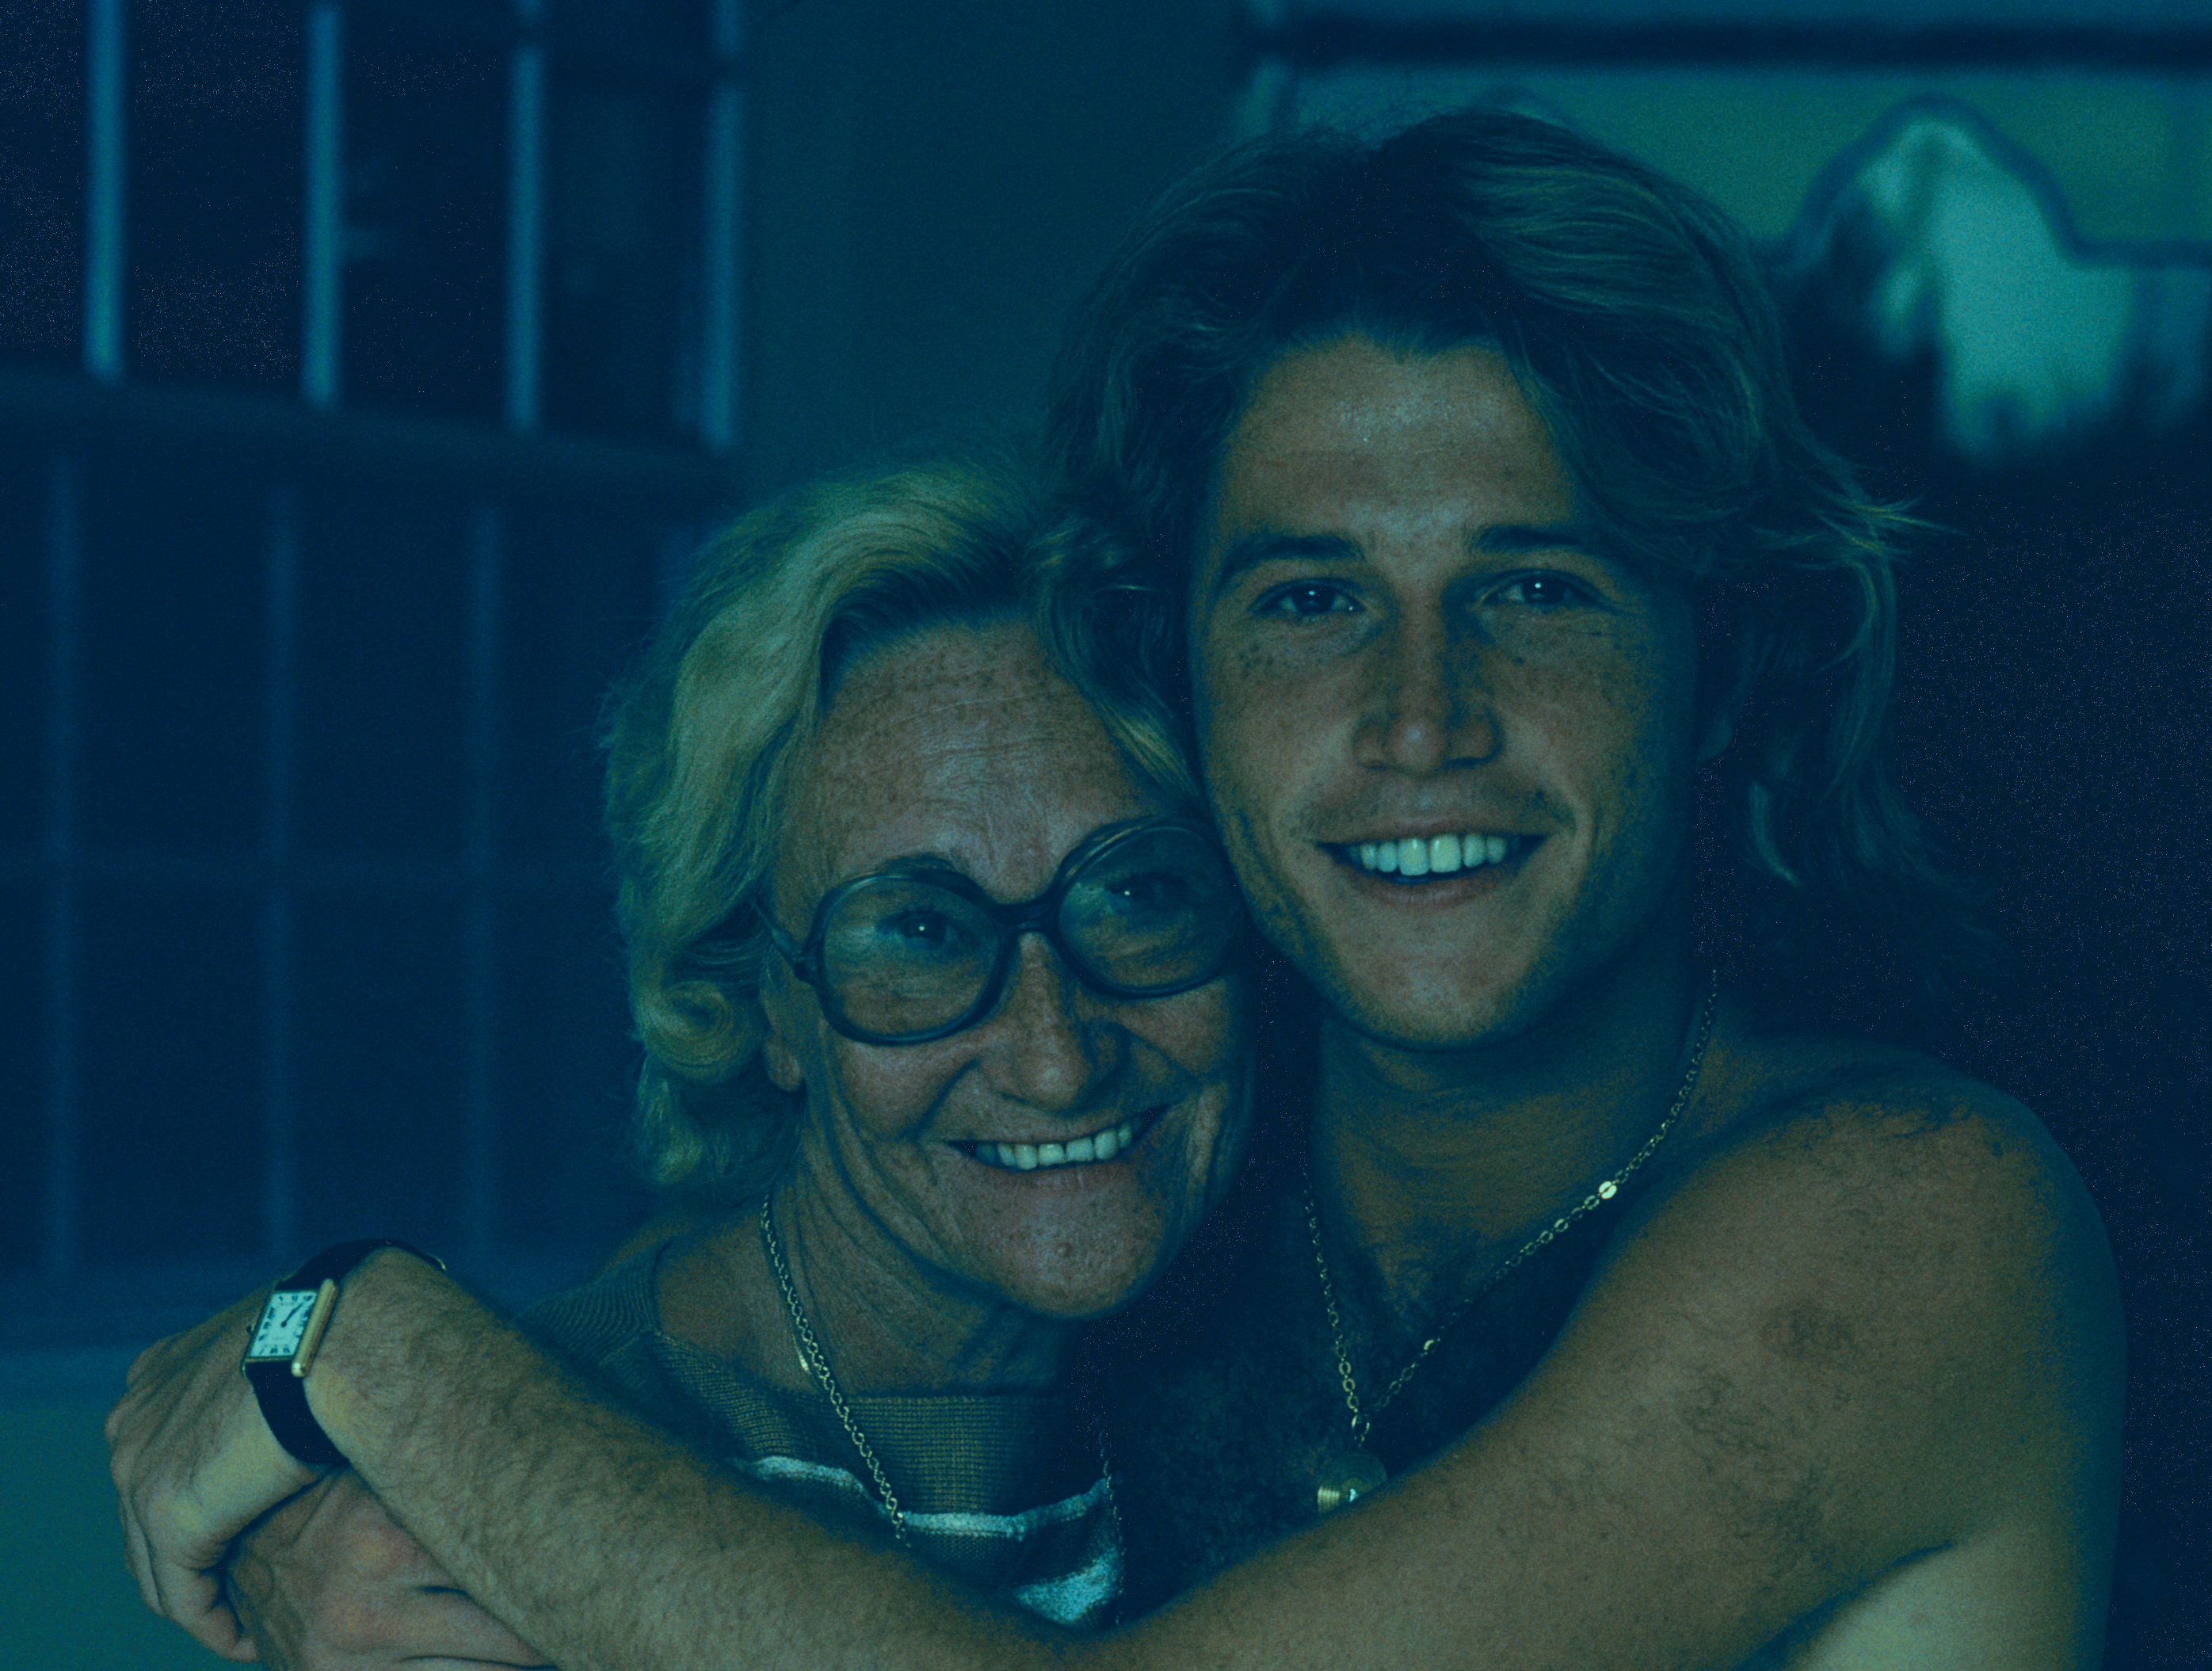 <p>For his birthday, Andy Gibb went to spend some time with his mother. It was there, alone with his mother in the countryside, that he turned 30. Some thought that this was a period of time where Gibb was becoming reclusive. Maybe it was a new era for him, a time for a more sane existence. </p>  <p><strong>But though there was still hope for Gibb, it wouldn’t last long.</strong></p>